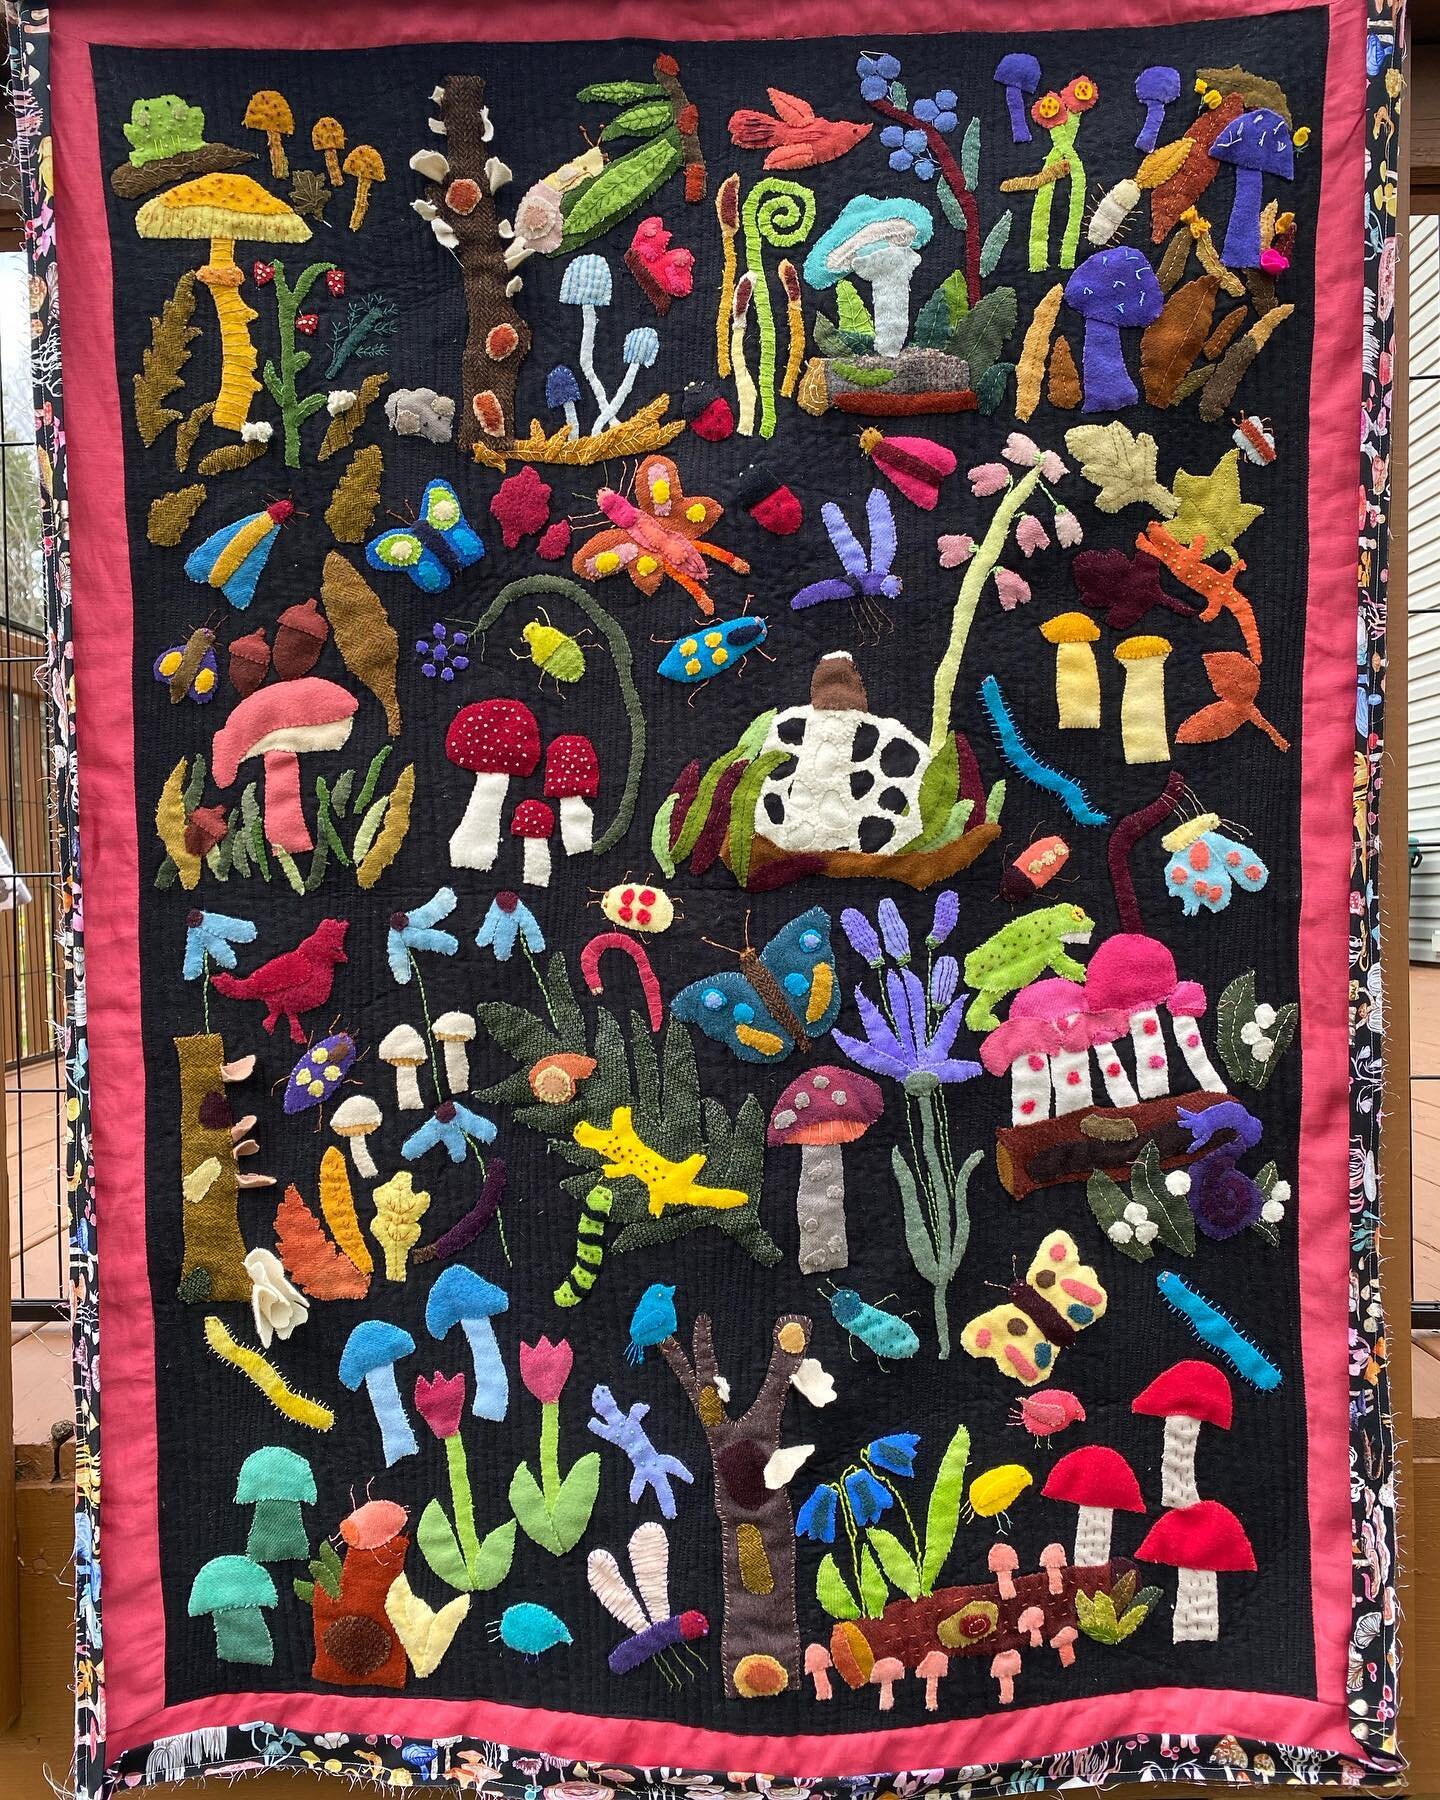 Fascinating mushroom appliqu&eacute; quilt by @deborahmennett Thank you for choosing me for your services. #longarmquilting #longarmquilter #207lq #gammill #gammillquilting #statlerstitcher #mainesmallbusiness #mainequilts #mainequilters #longarmquil